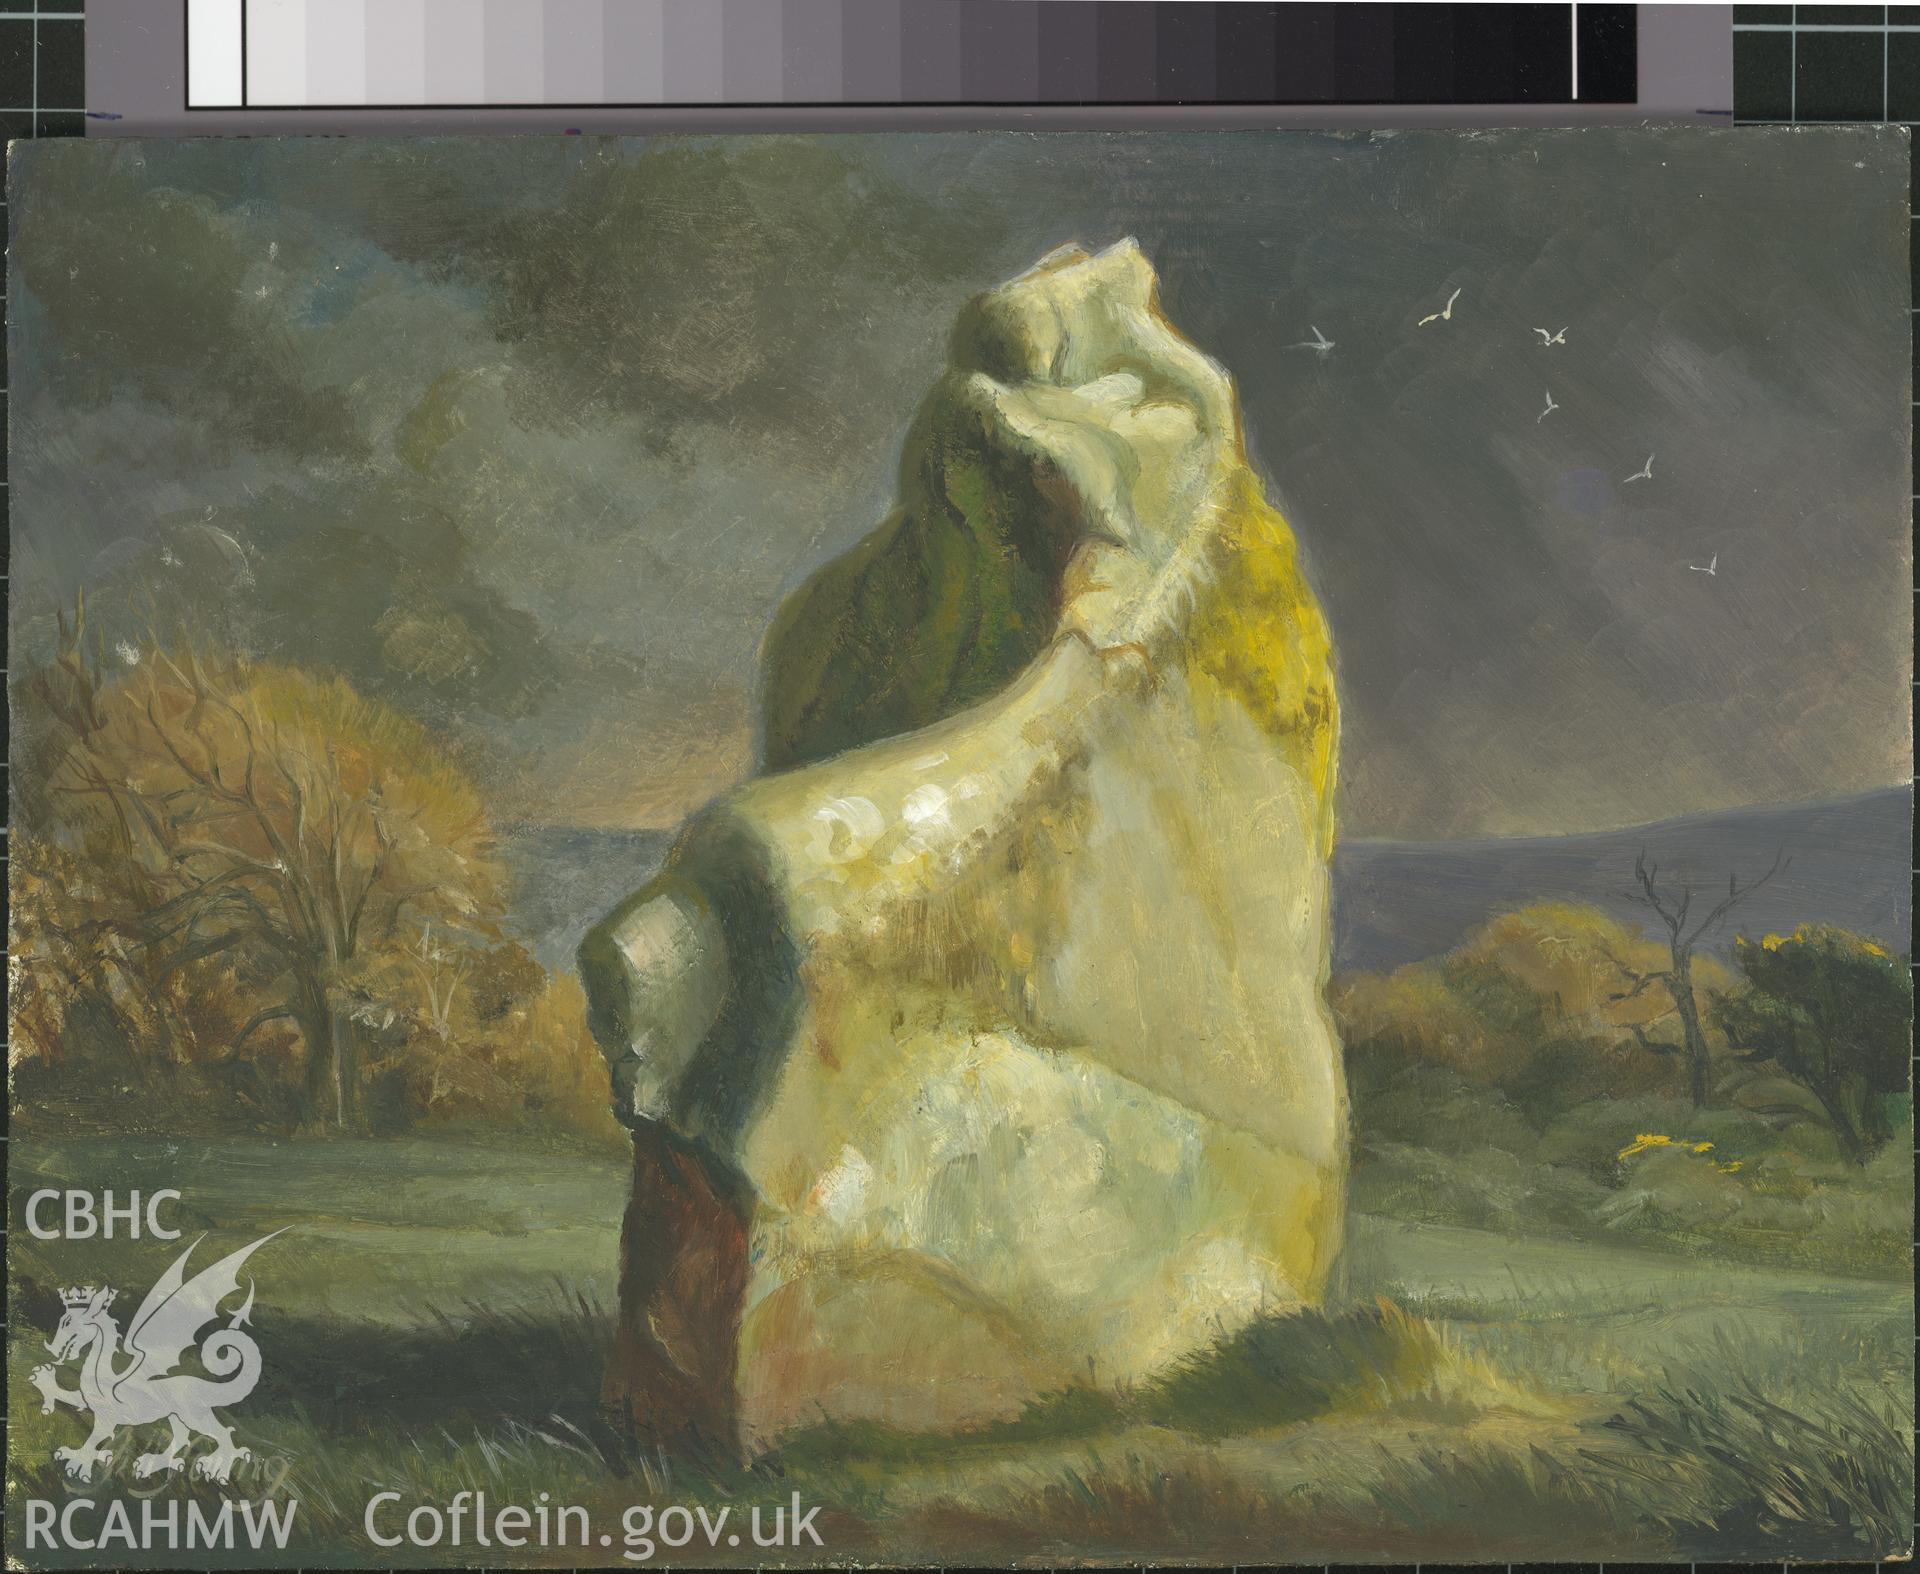 Digital copy of 5" x 8" oil painting of a standing stone, Rhyndaston, Haycastle, from an original painted by Mrs J.C. Young.